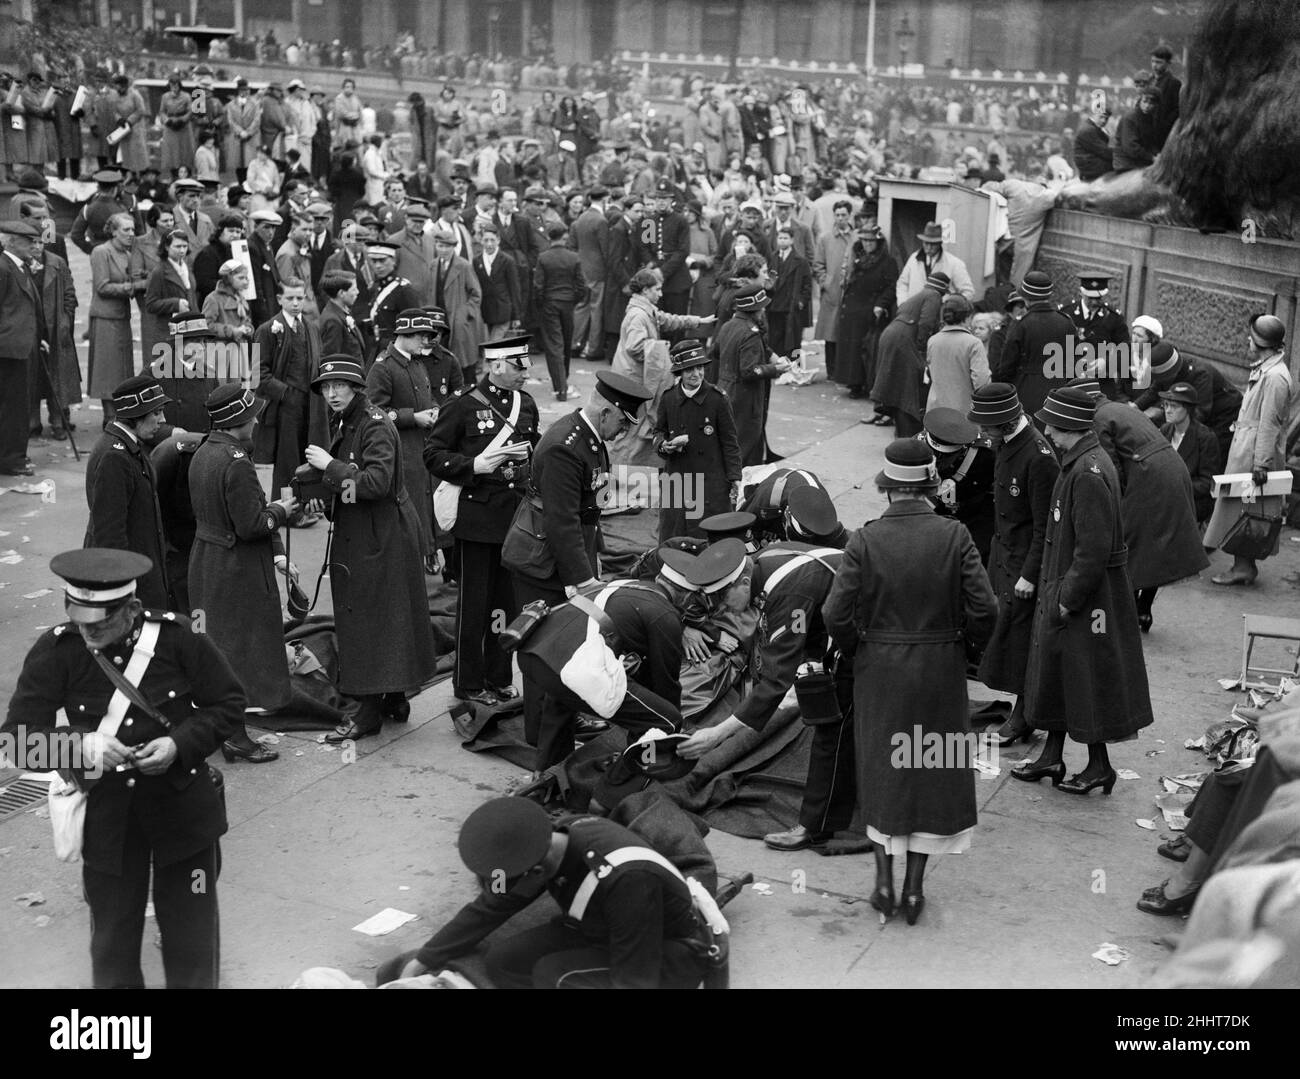 Coronation of King George VI.St Johns Ambulance workers treating injured people in the crowd at Trafalgar Square, awaiting the procession. 12th May 1937. Stock Photo